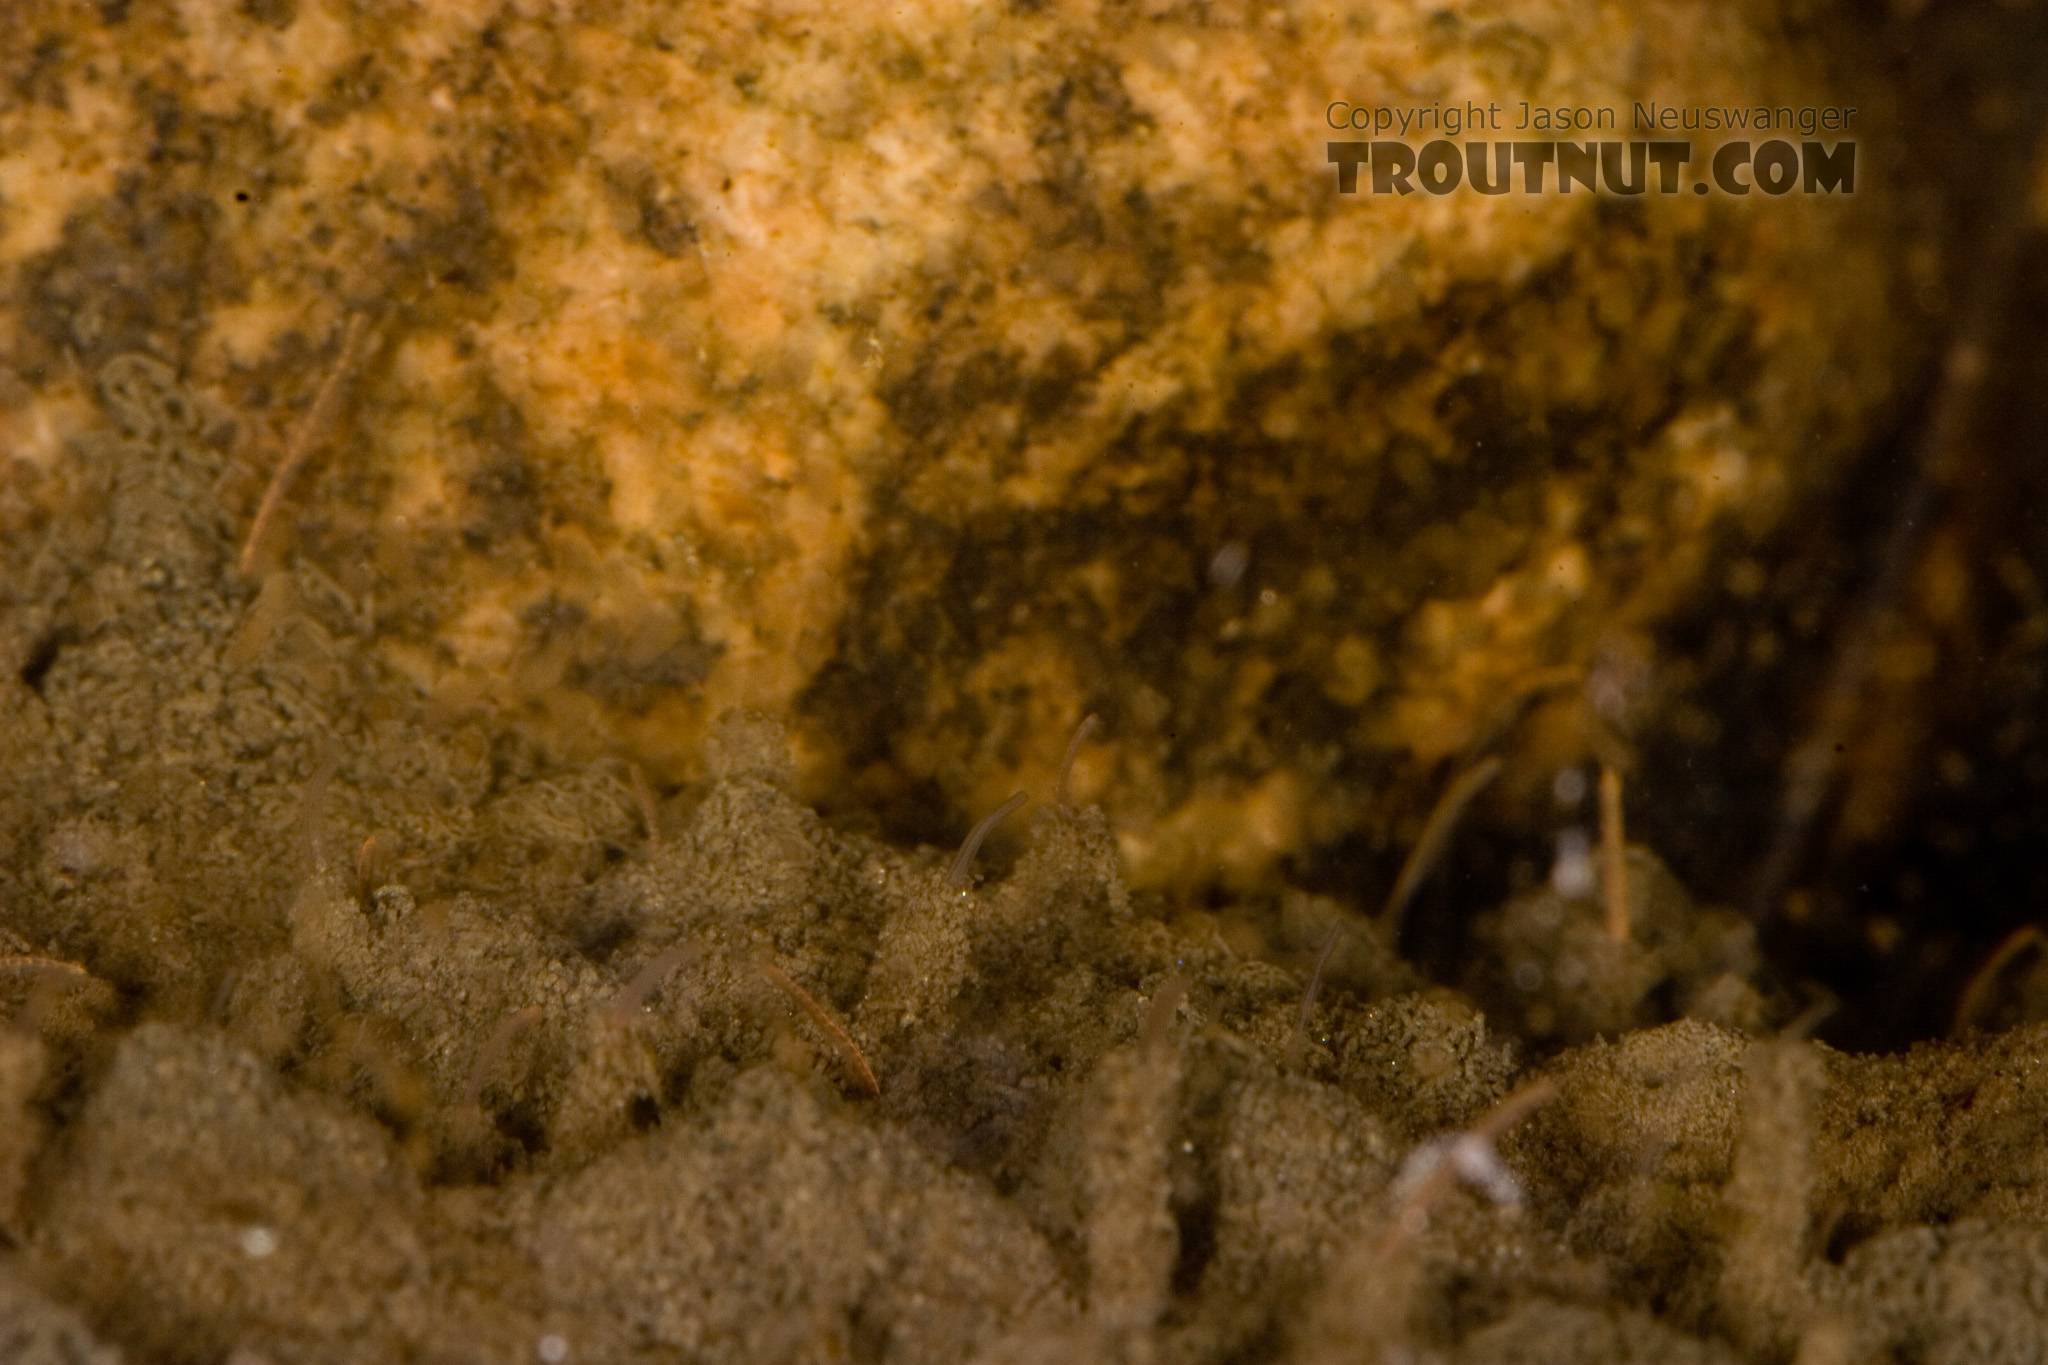 This isn't really an underwater picture, but a picture taken into my aquarium of midge larvae which lived in the silt I used for substrate.  Each larva has a little tower of detritus built up along the bottom, while the bare larva waves around from the top.  In this picture: True Fly Family Chironomidae (Midges). From Mystery Creek # 62 in New York.